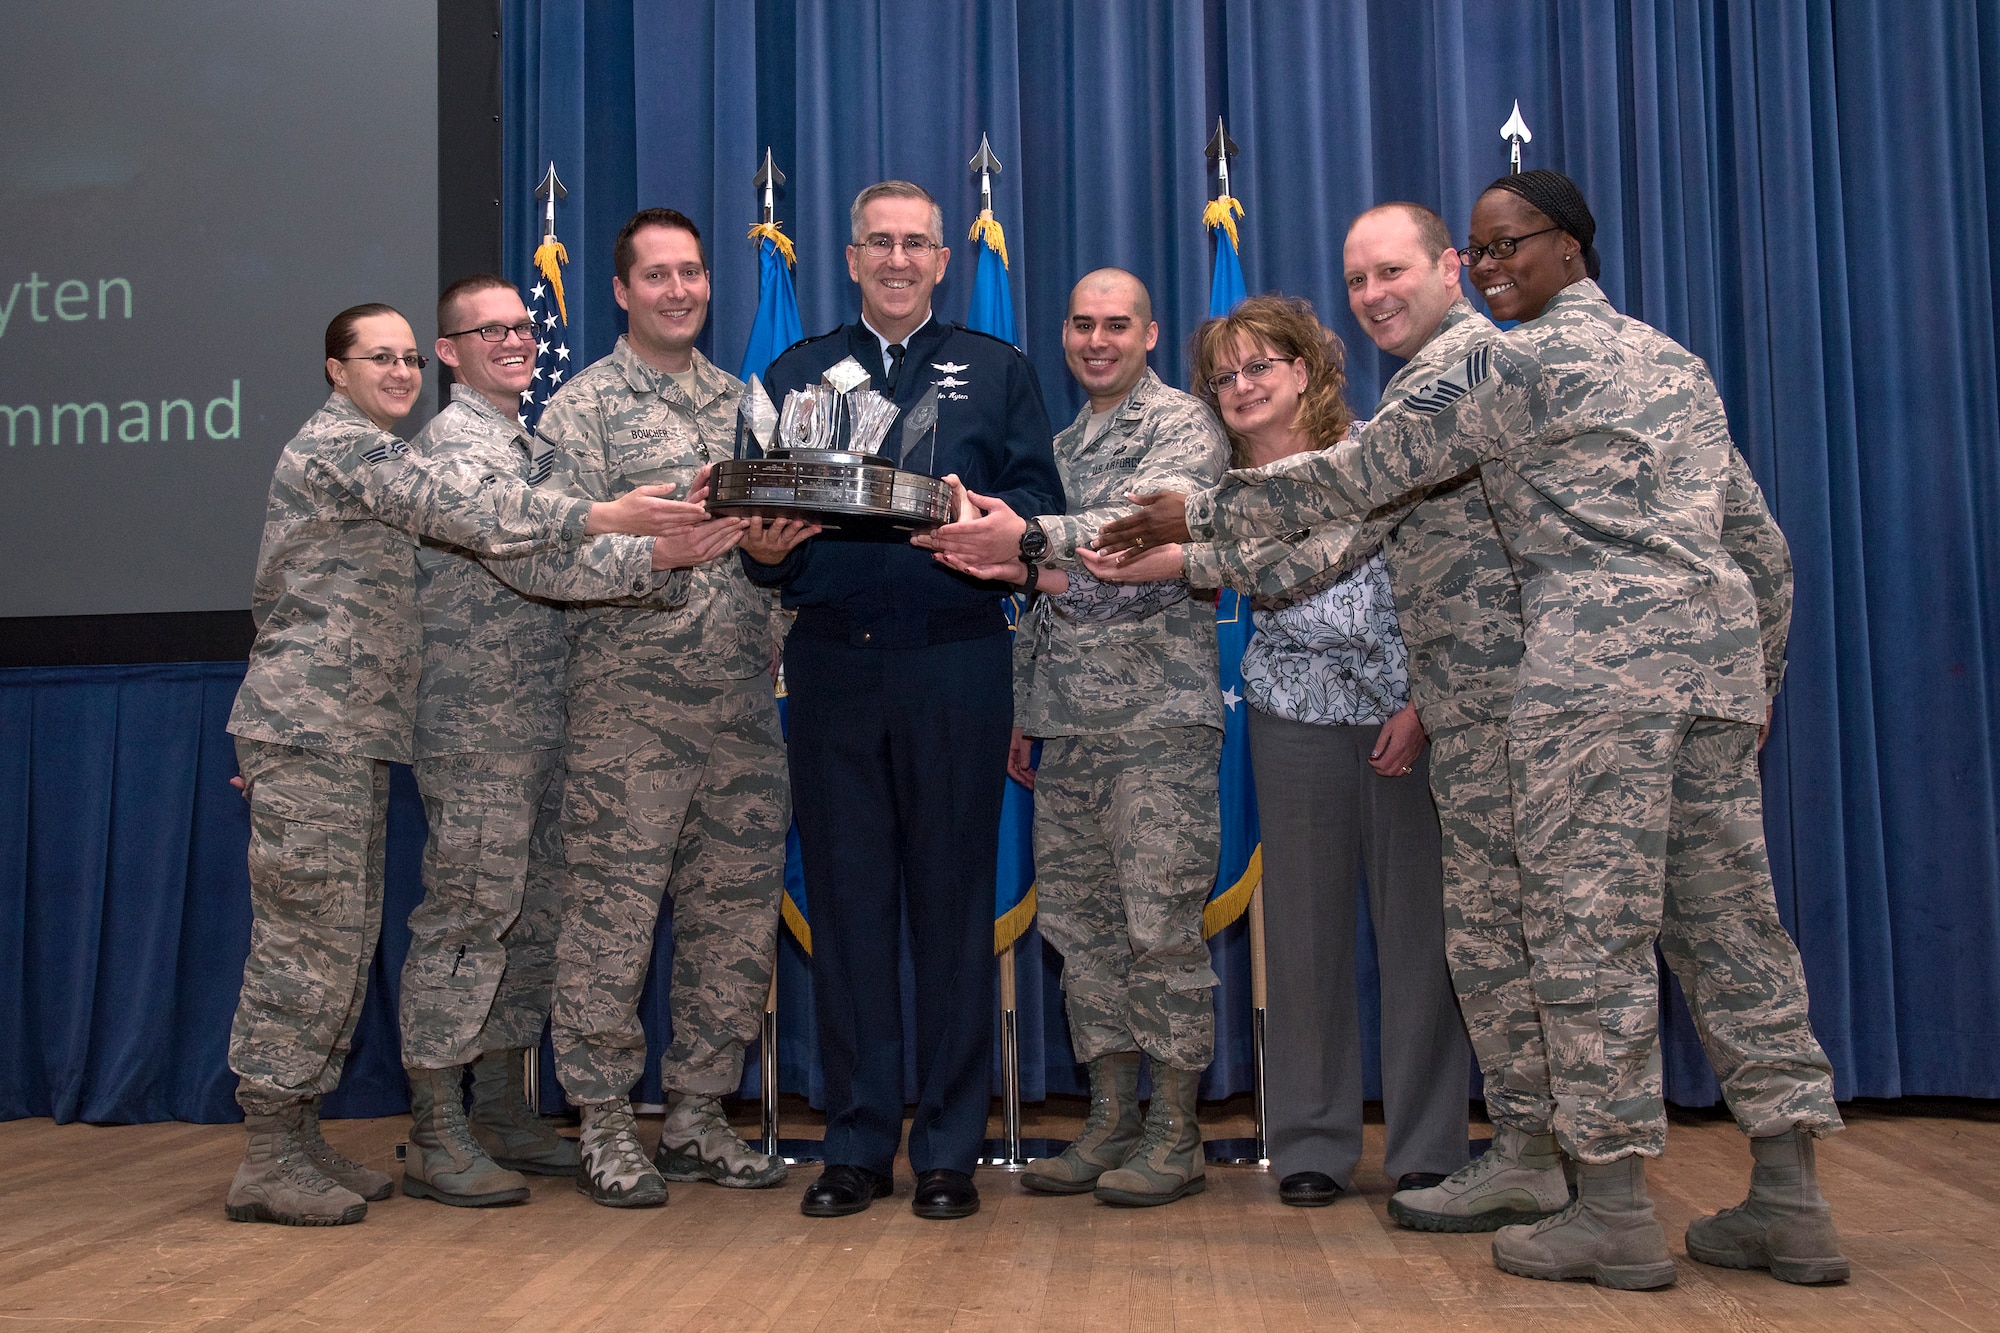 PETERSON AIR FORCE BASE, Colo. – Gen. John E. Hyten, Air Force Space Command commander presents the General Thomas S. Moorman Jr. Trophy to the 21st Space Wing for best overall wing in Air Force Space Command on April 21, 2016 during the 21st Space Wing Commander’s Call.  Accepting the trophy (from left) Senior Airman Megan Karlsen, 21st Security Forces Squadron, Staff Sgt. Josh Heroux, 21st Medical Group, Master Sgt. Chad Boucher, 721st Security Forces Squadron, Capt. Cesar Carvajal, 21st Operations Group, Carrie Granzella, 21st Comptroller Squadron, Col. Douglas Schiess, 21st Space Wing commander and Chief Master Sgt. Nanette Klingaman, 721st Mission Support Group superintendent. (U.S. Air Force Photo by Craig Denton)

